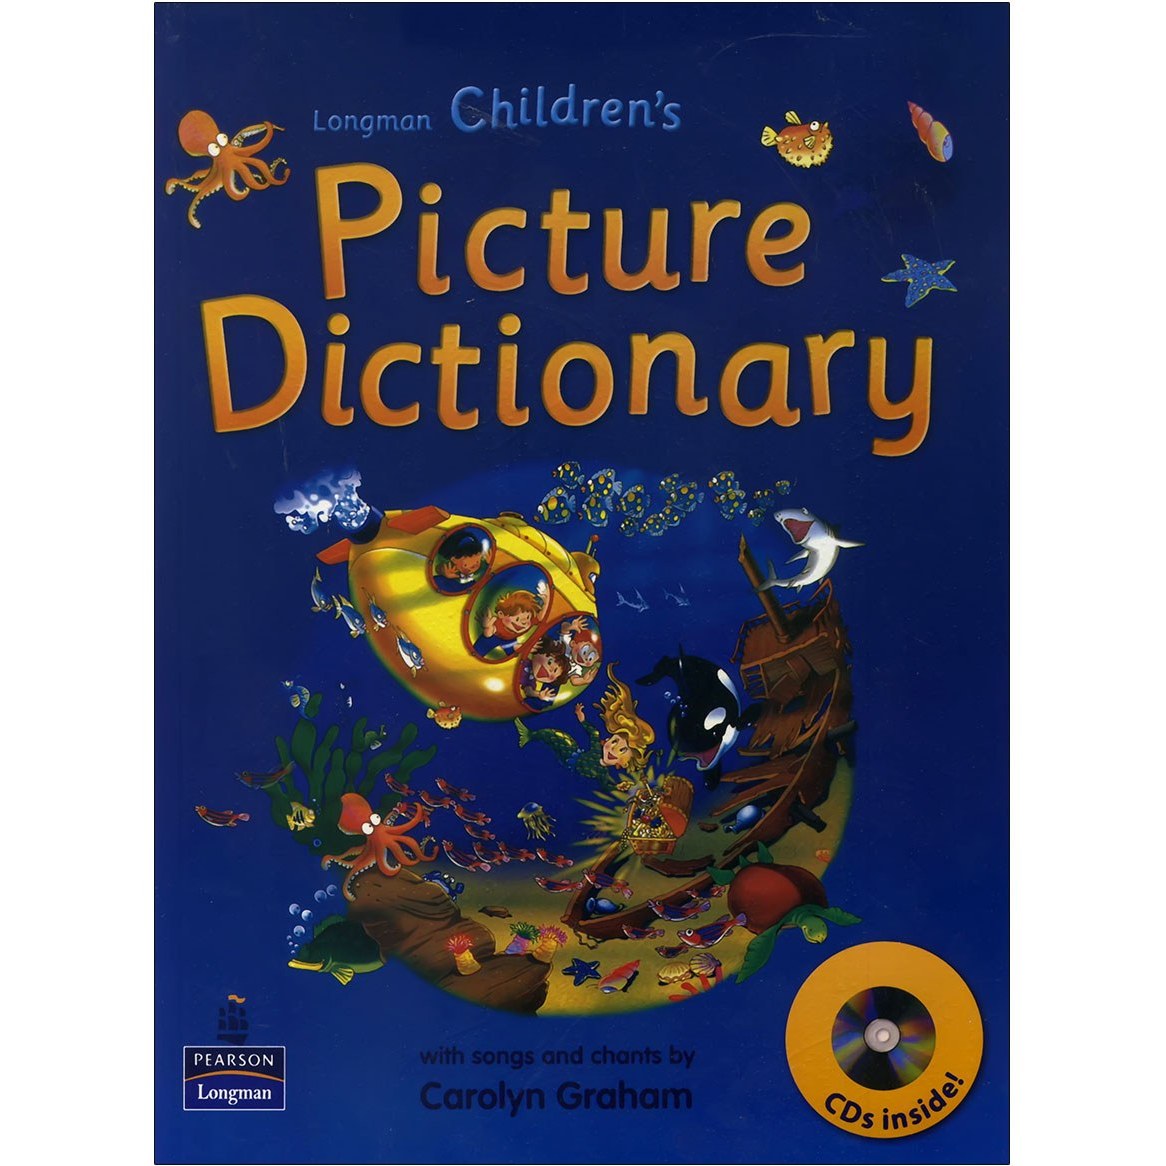 childrens　CD　picture　dictionary　with　ترب　خرید　قیمت　و　Longman